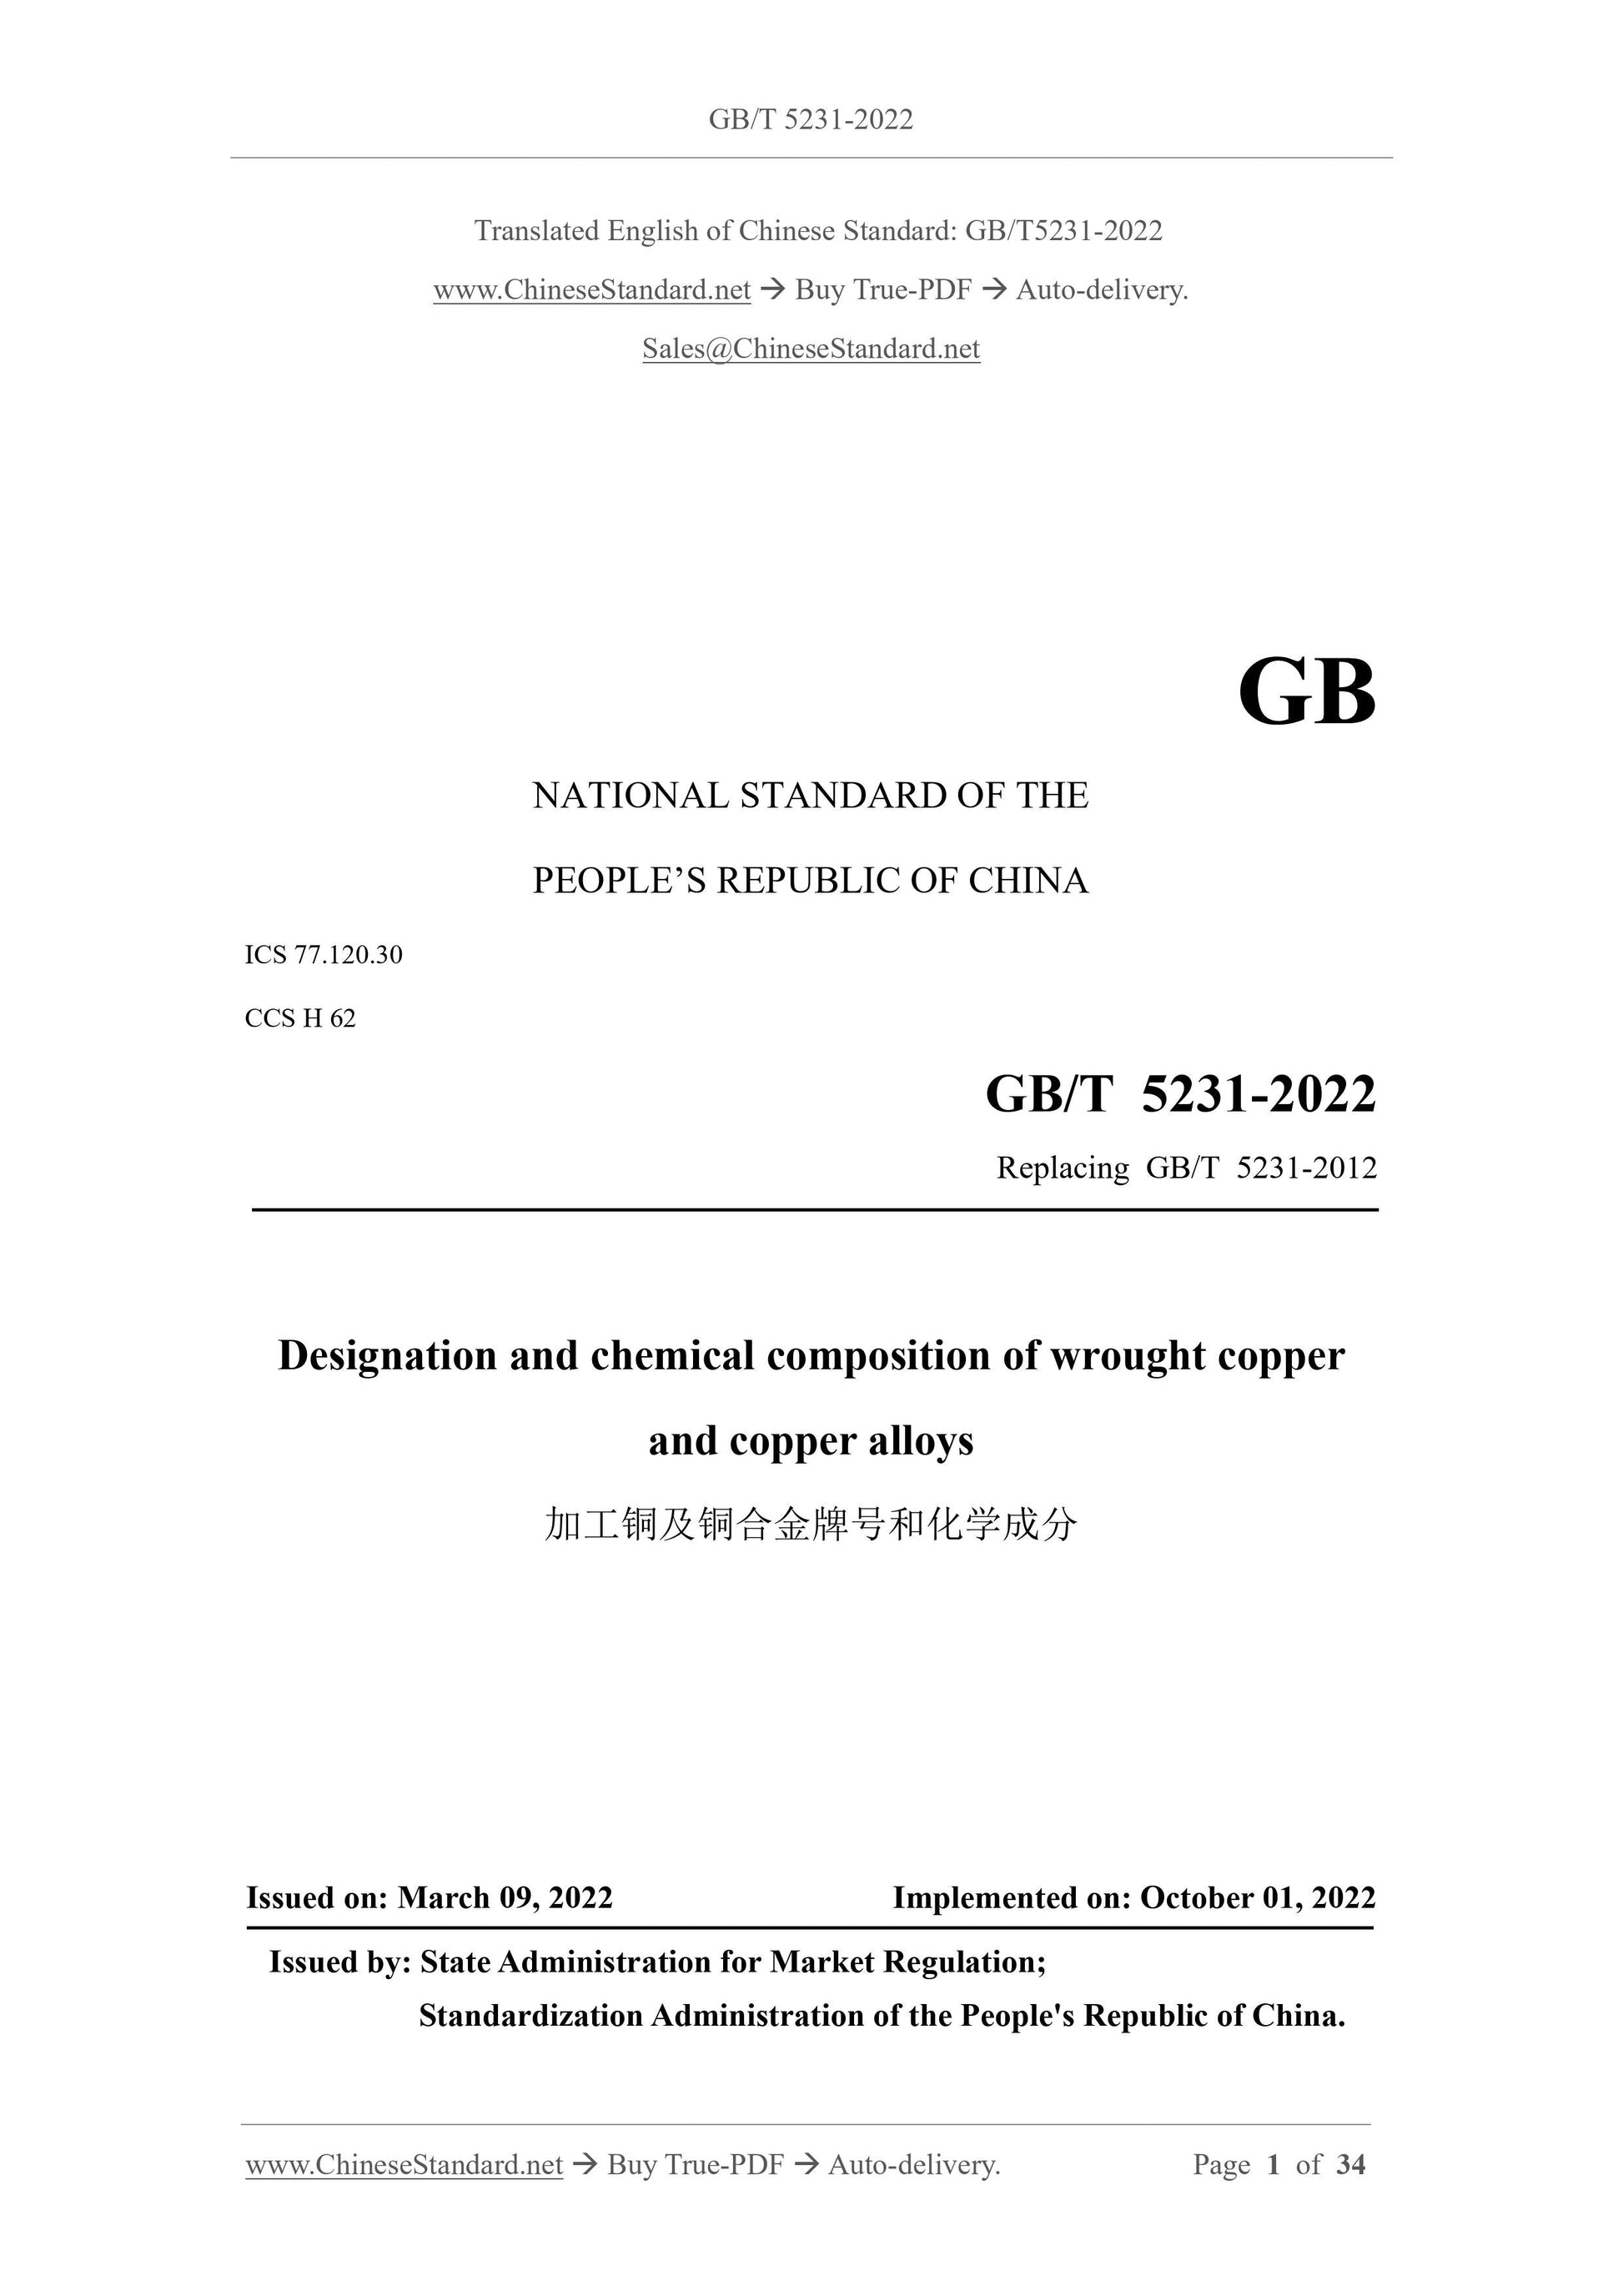 GB/T 5231-2022 Page 1